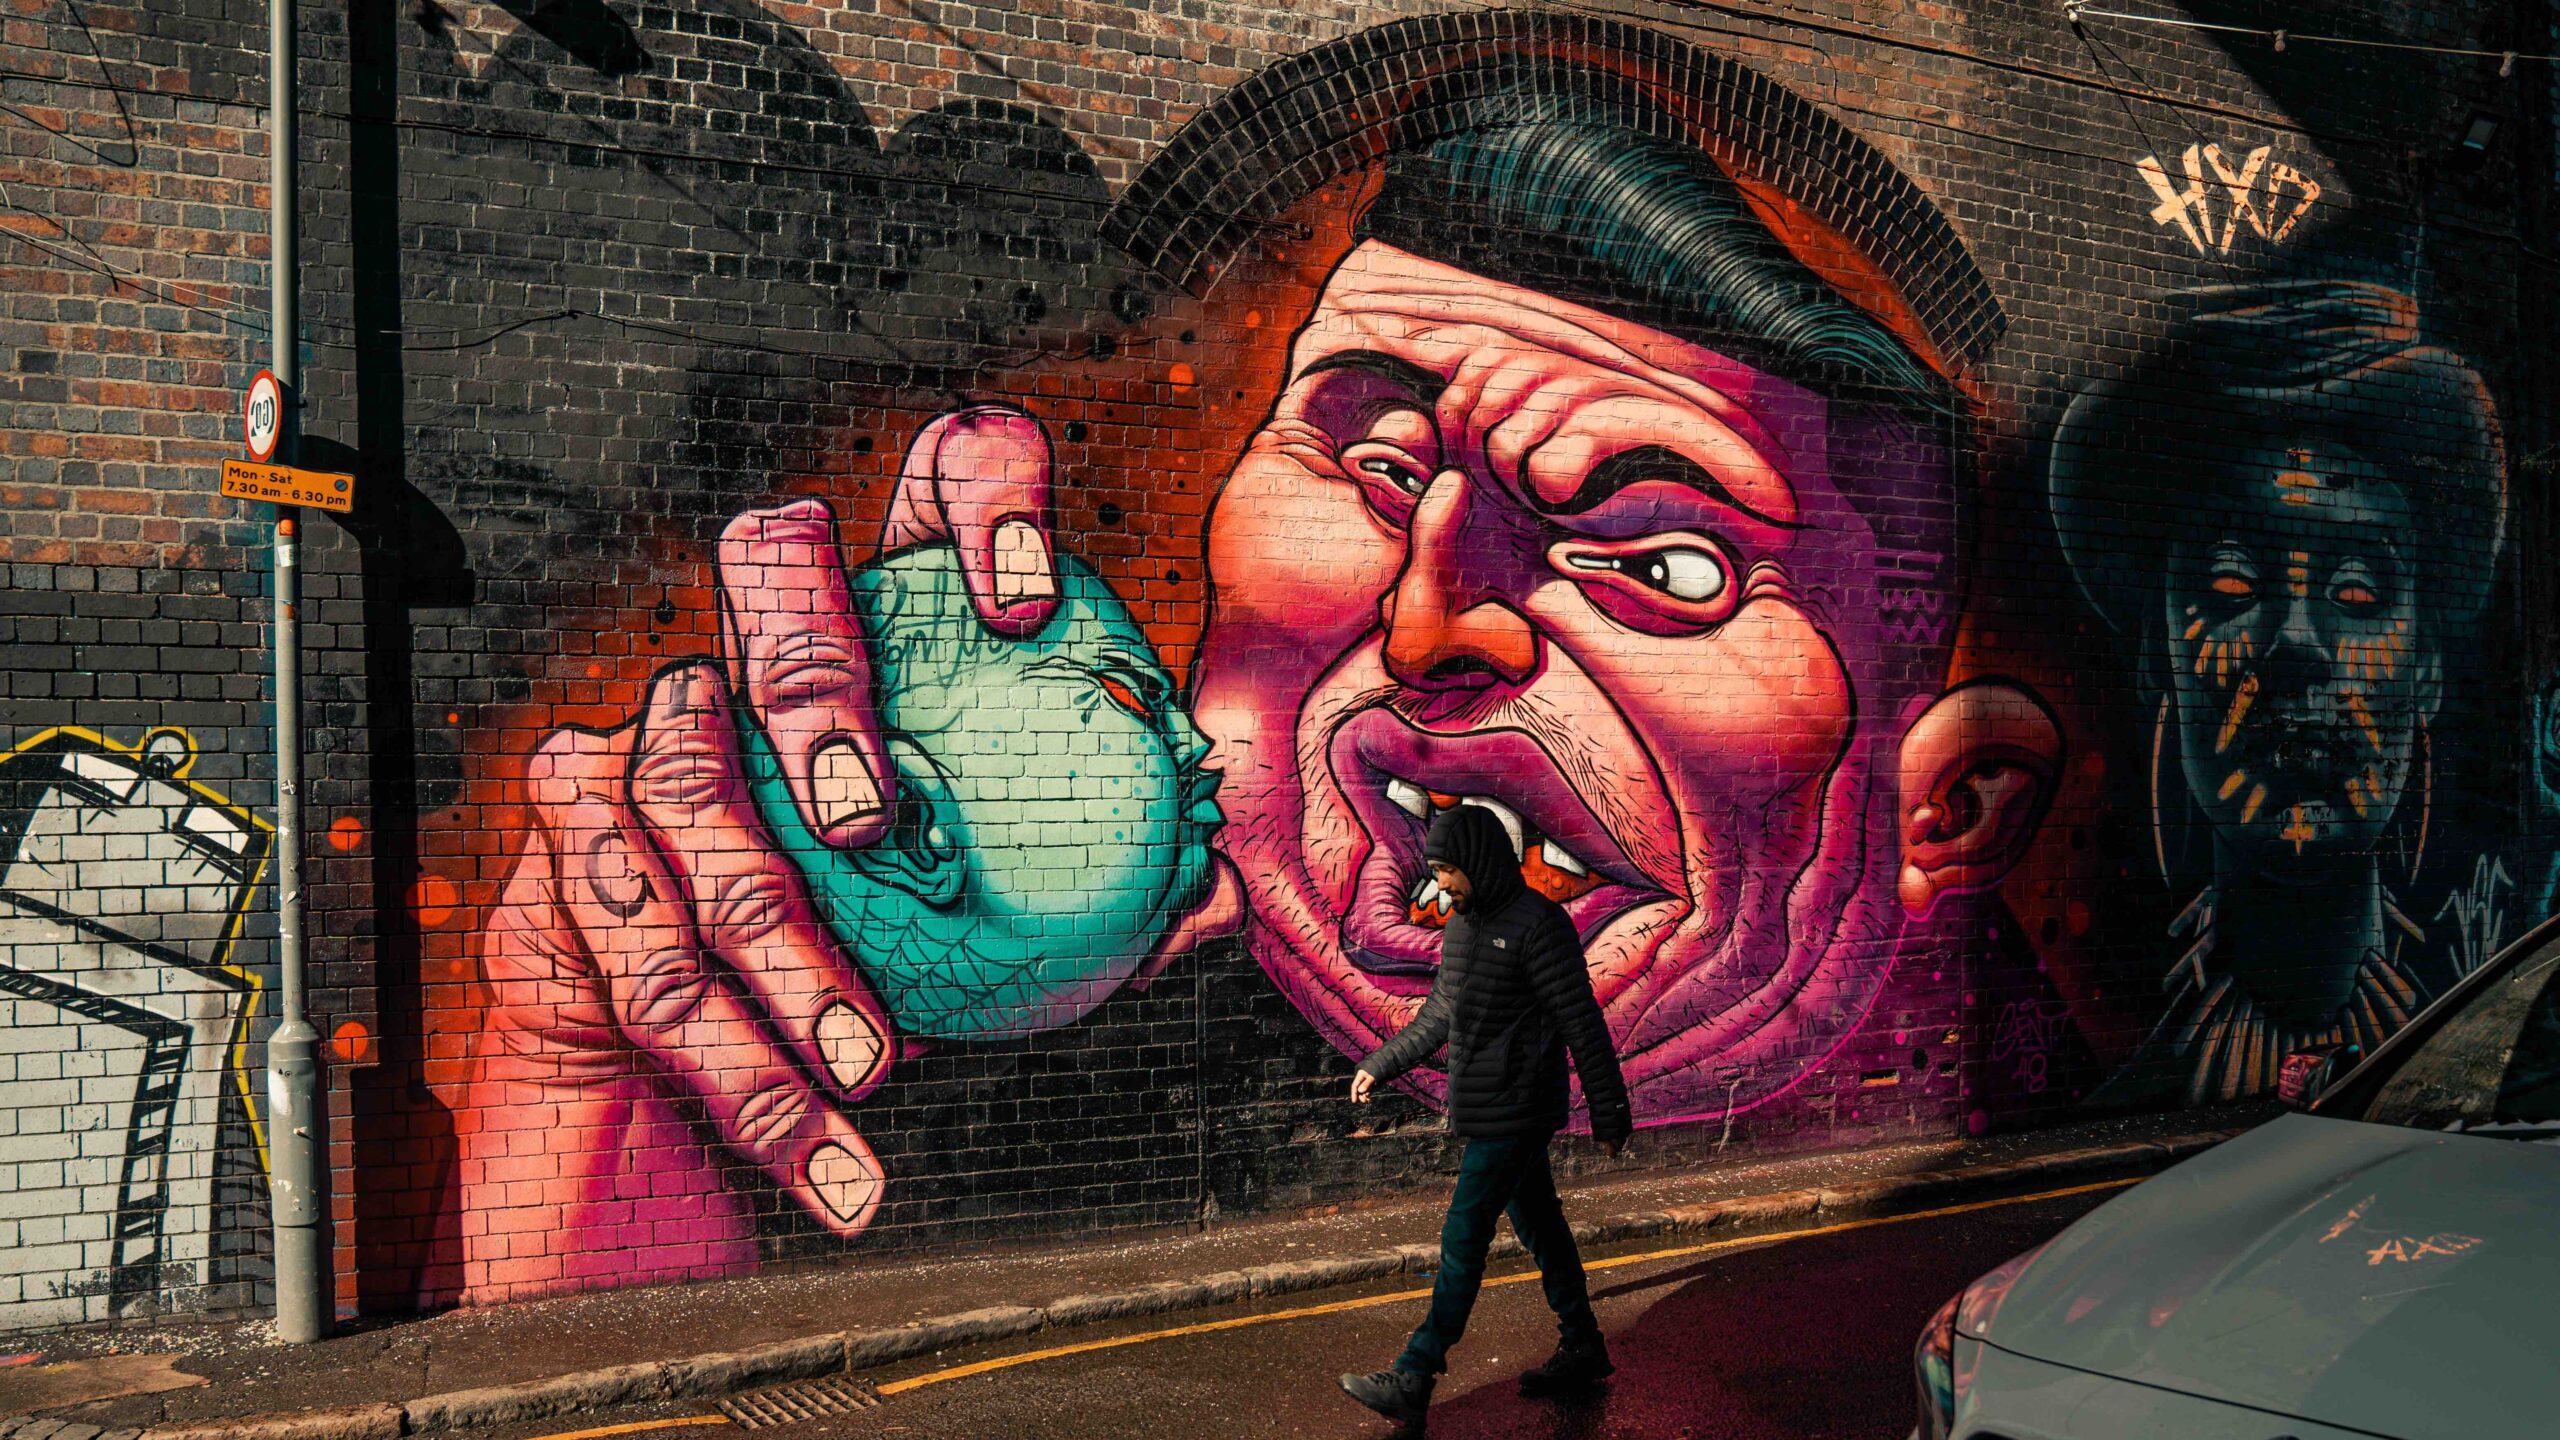 24 Hours in Digbeth